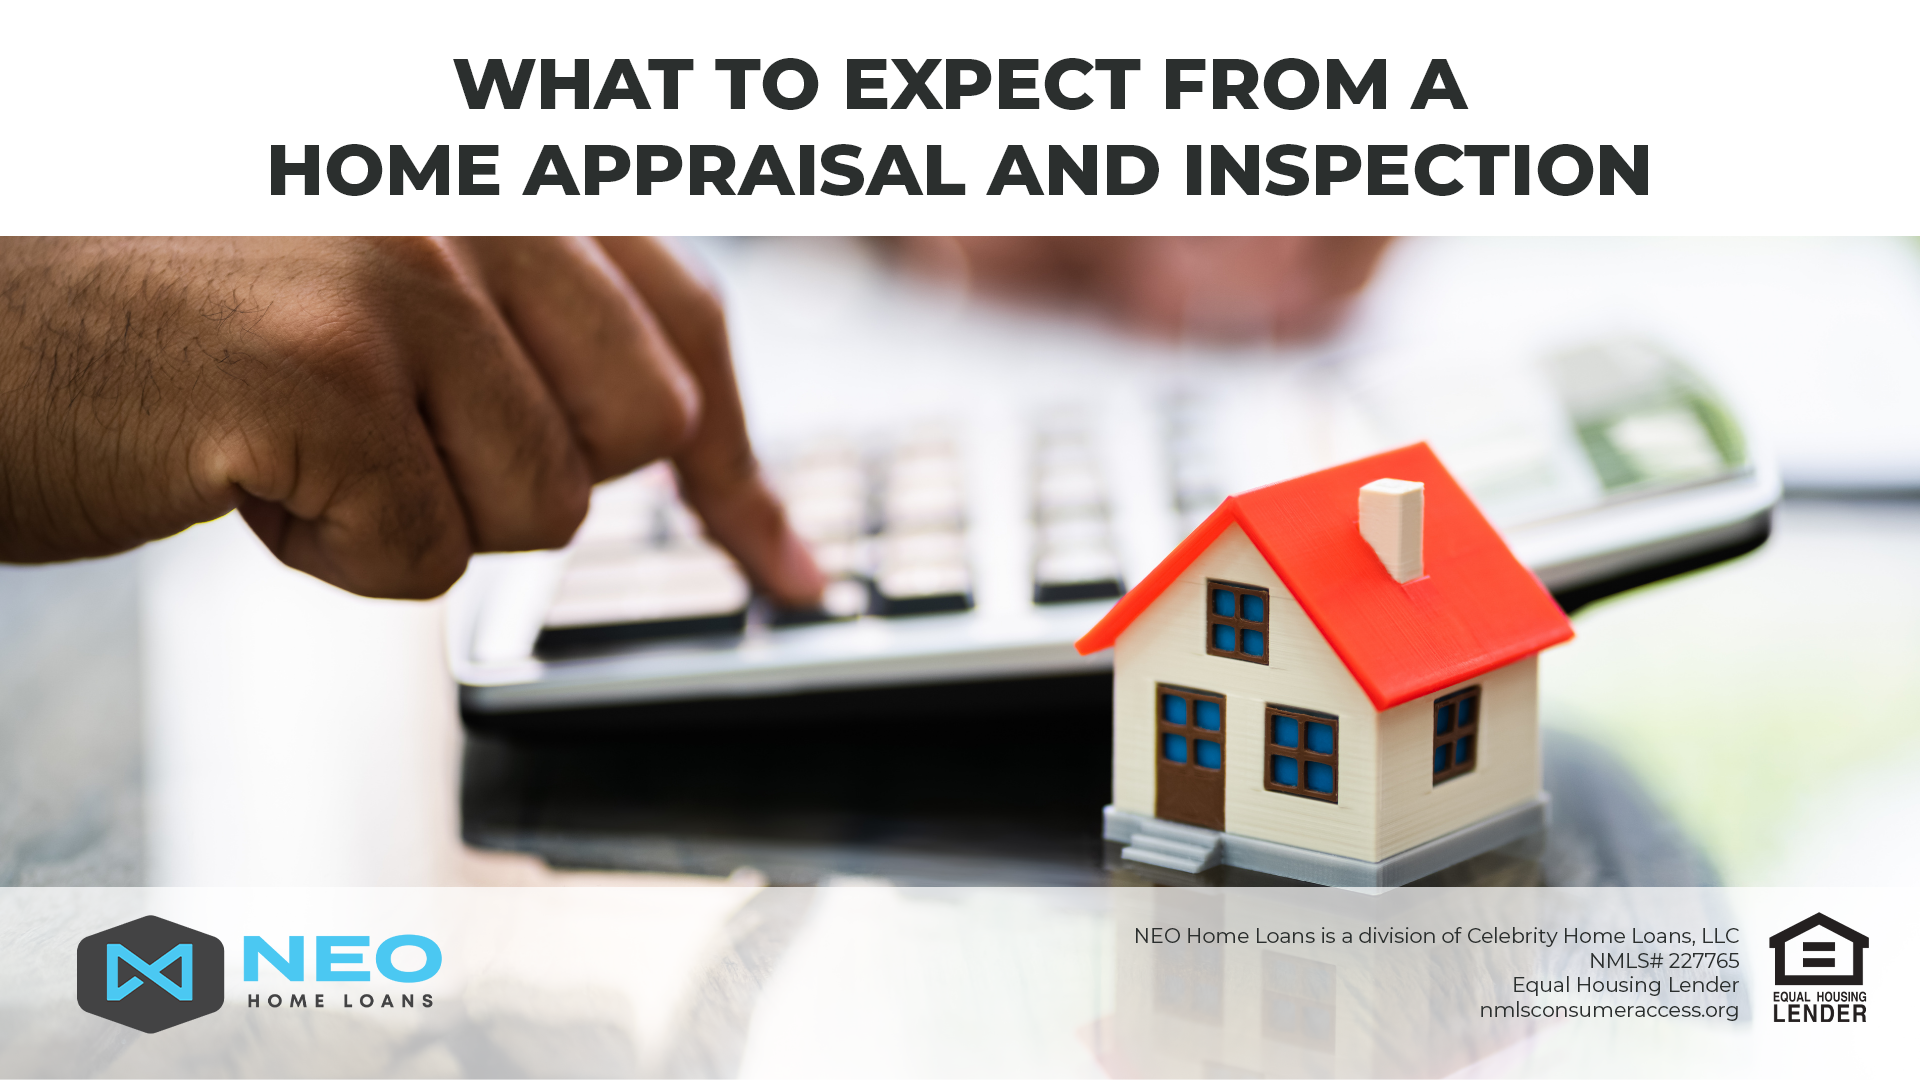 What to Expect From a Home Appraisal and Inspection